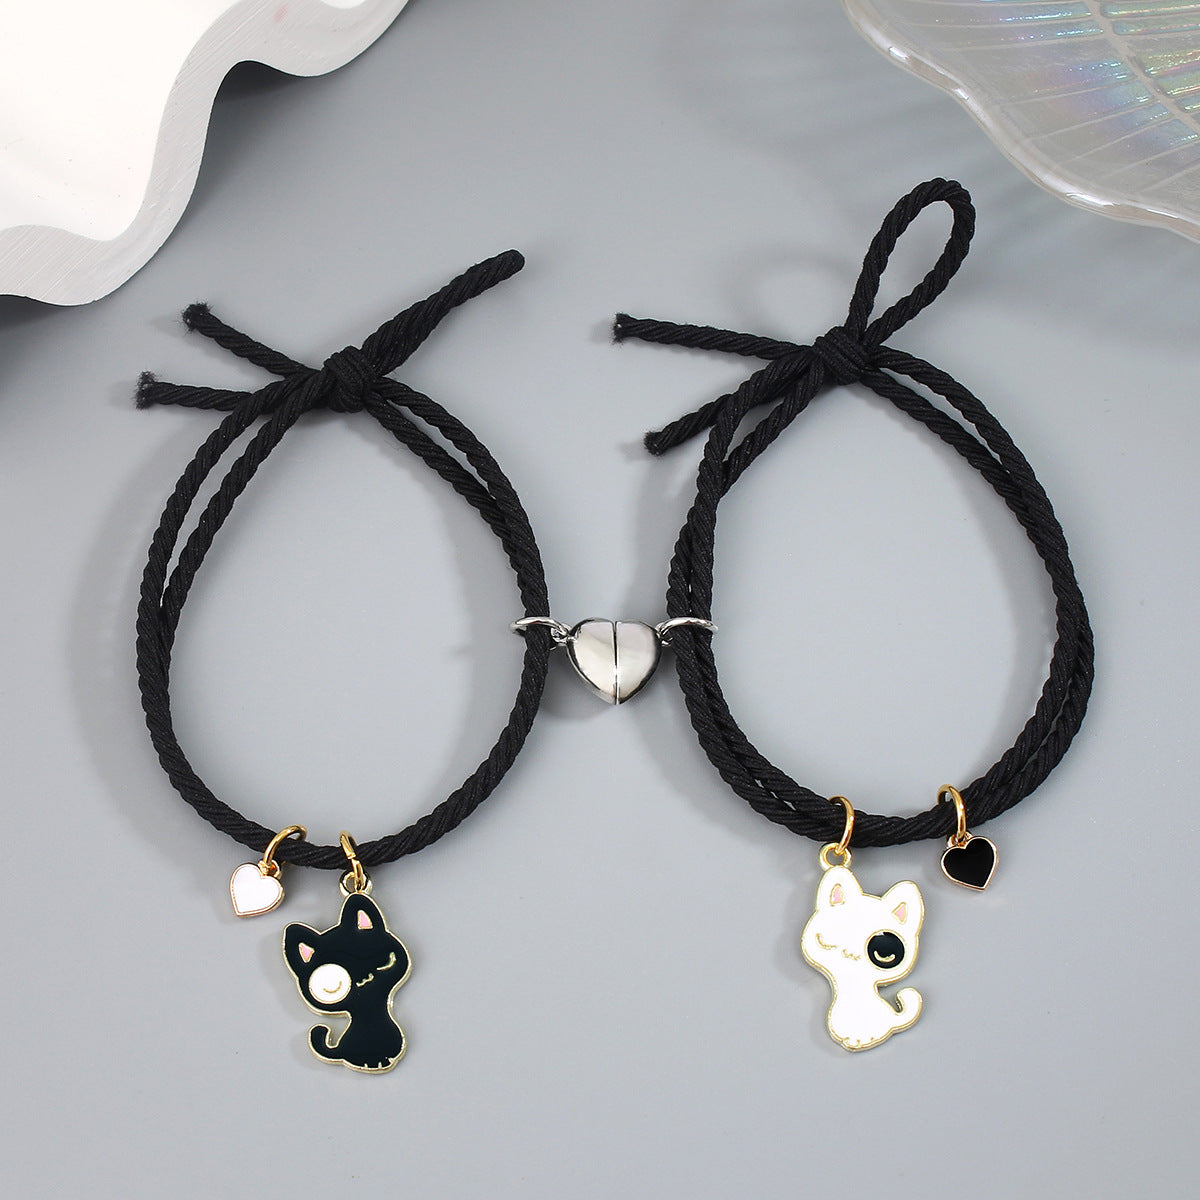 Cute Animal Stainless Steel Rubber Band Rope Handmade Couple Wristband